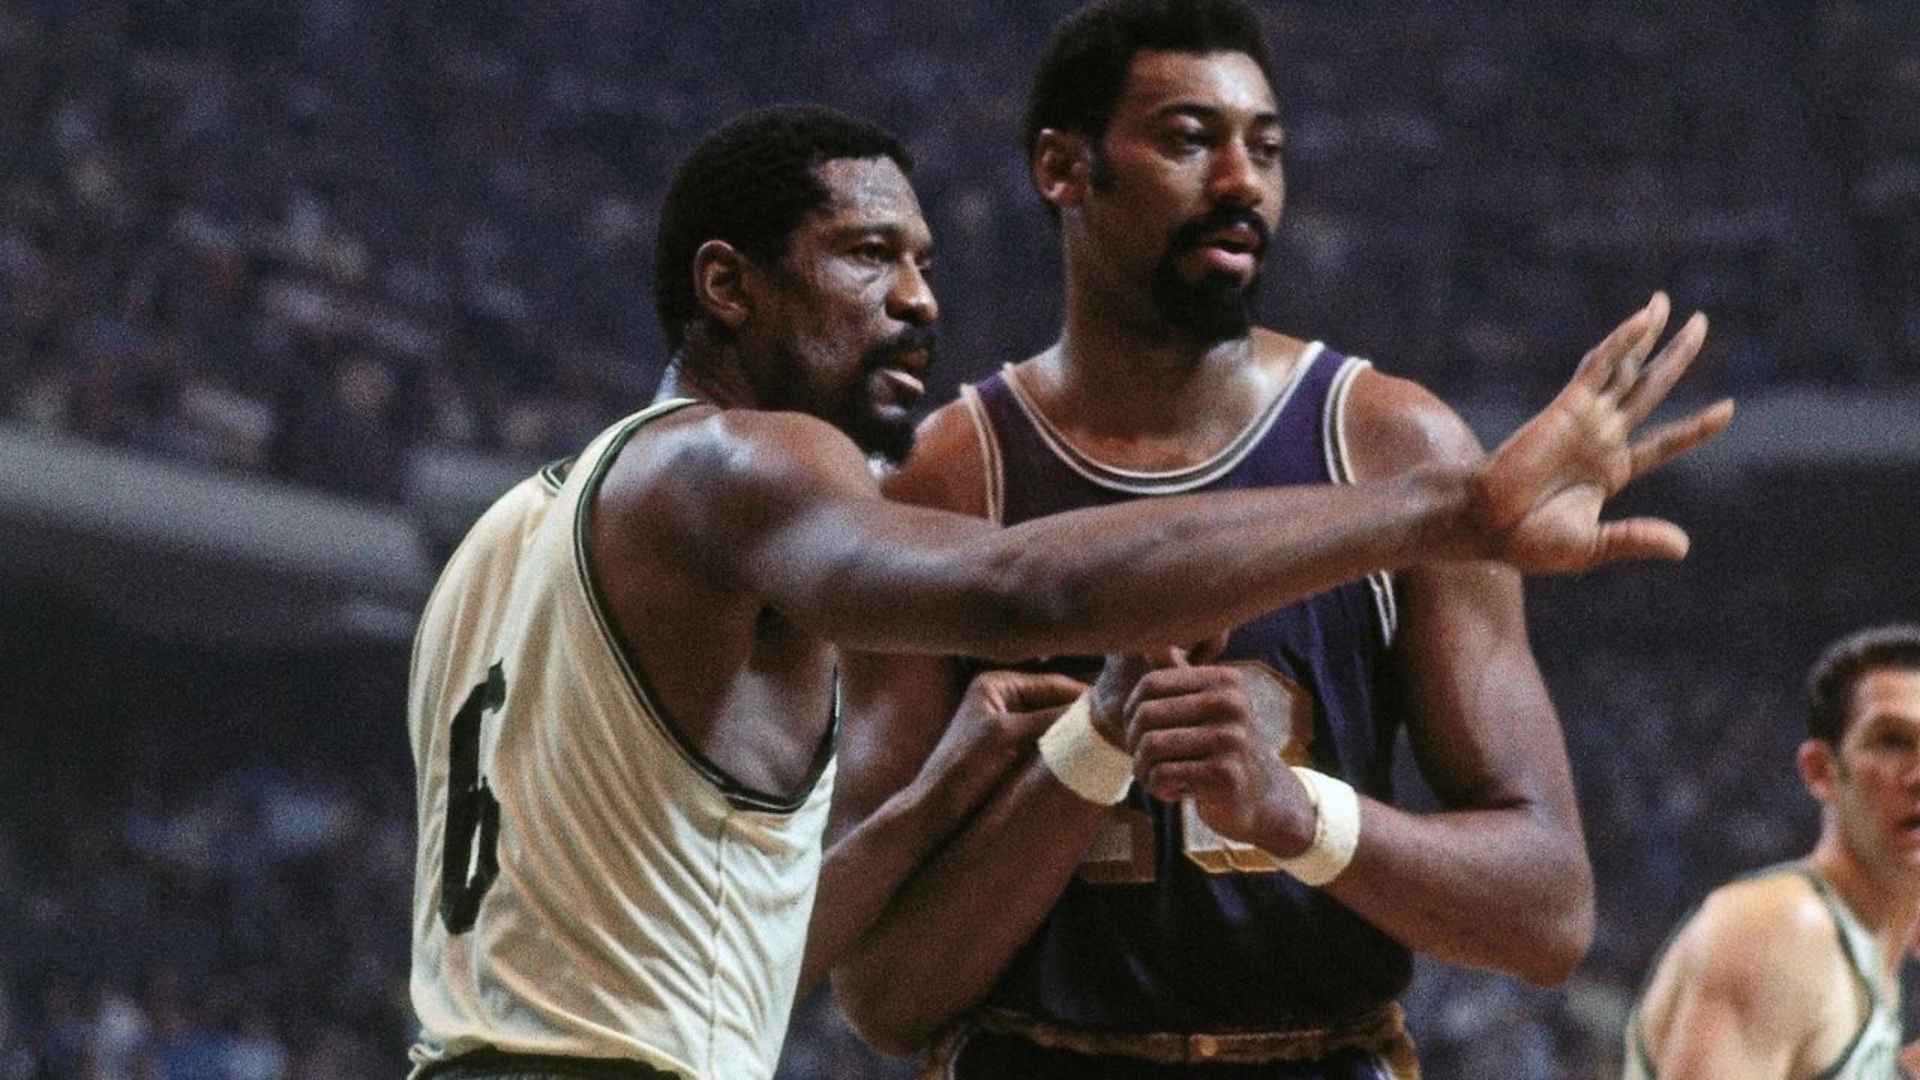 Wilt Chamberlain and Bill Russell lead the list for most rebounds in the NBA. (Image credits: twitter)